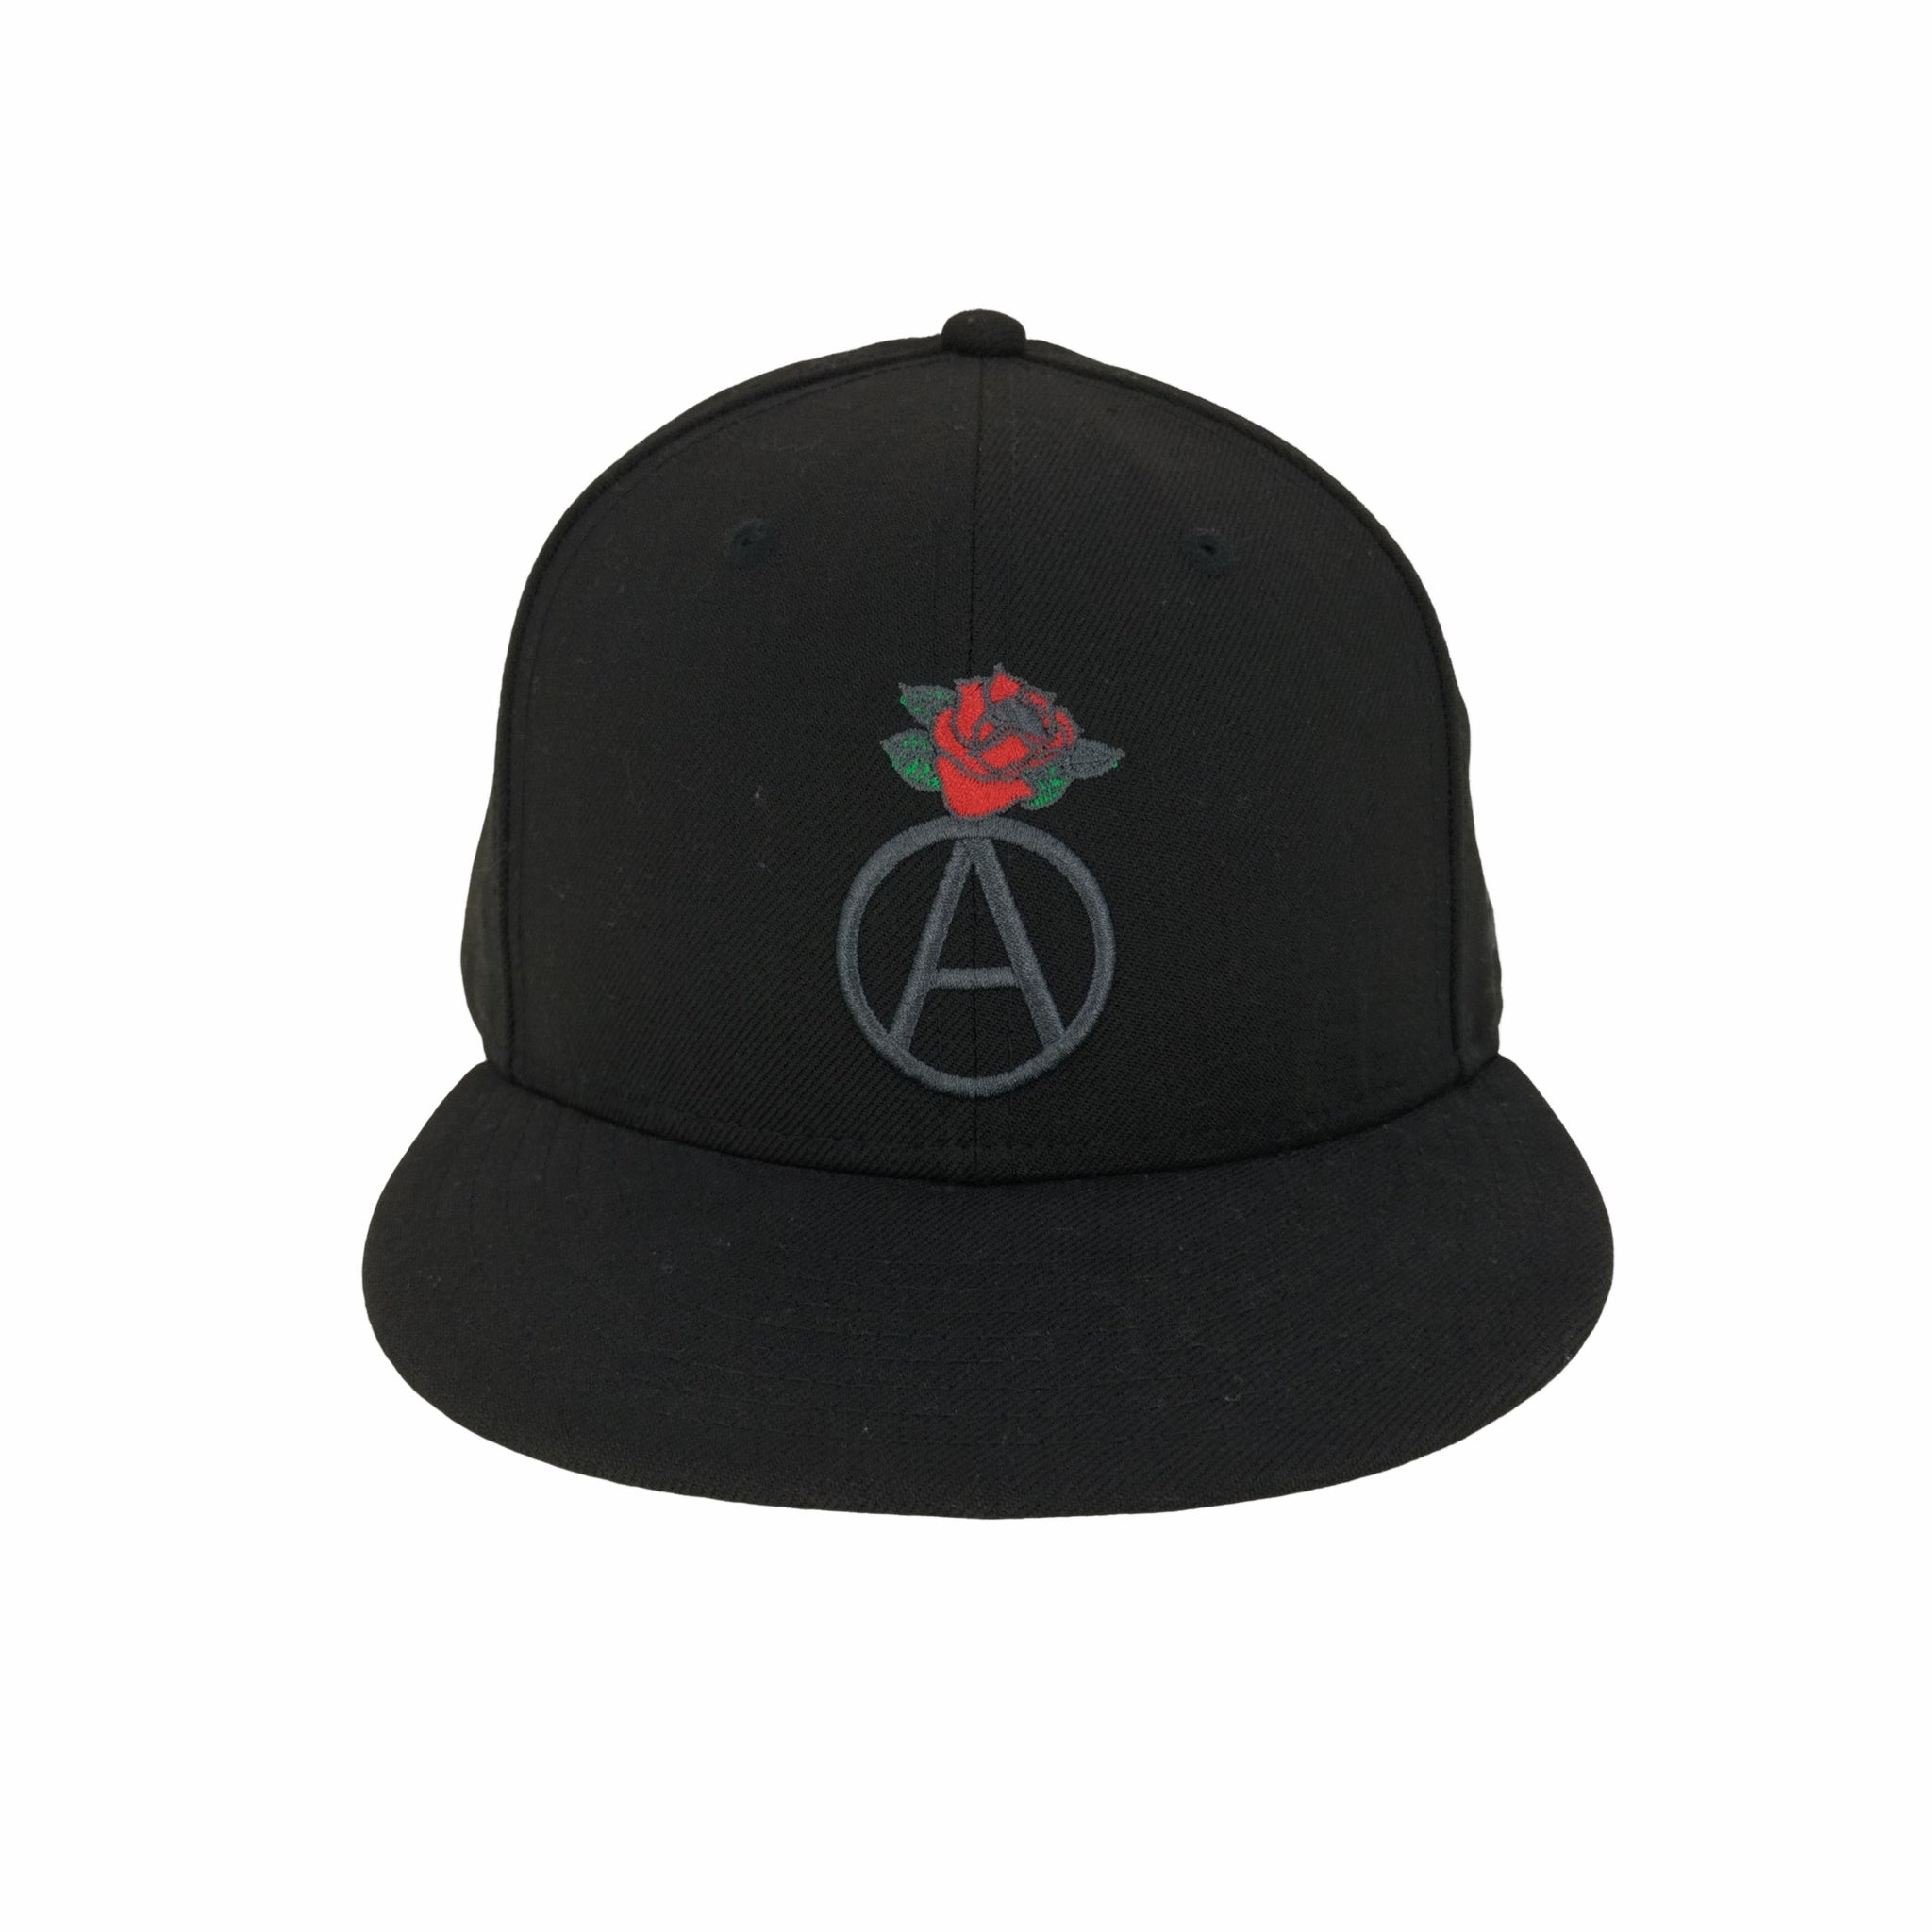 UNDERCOVER(アンダーカバー)ANARCHY IS THE KEY 9FIFTY スナップバック 6パネルキャップ